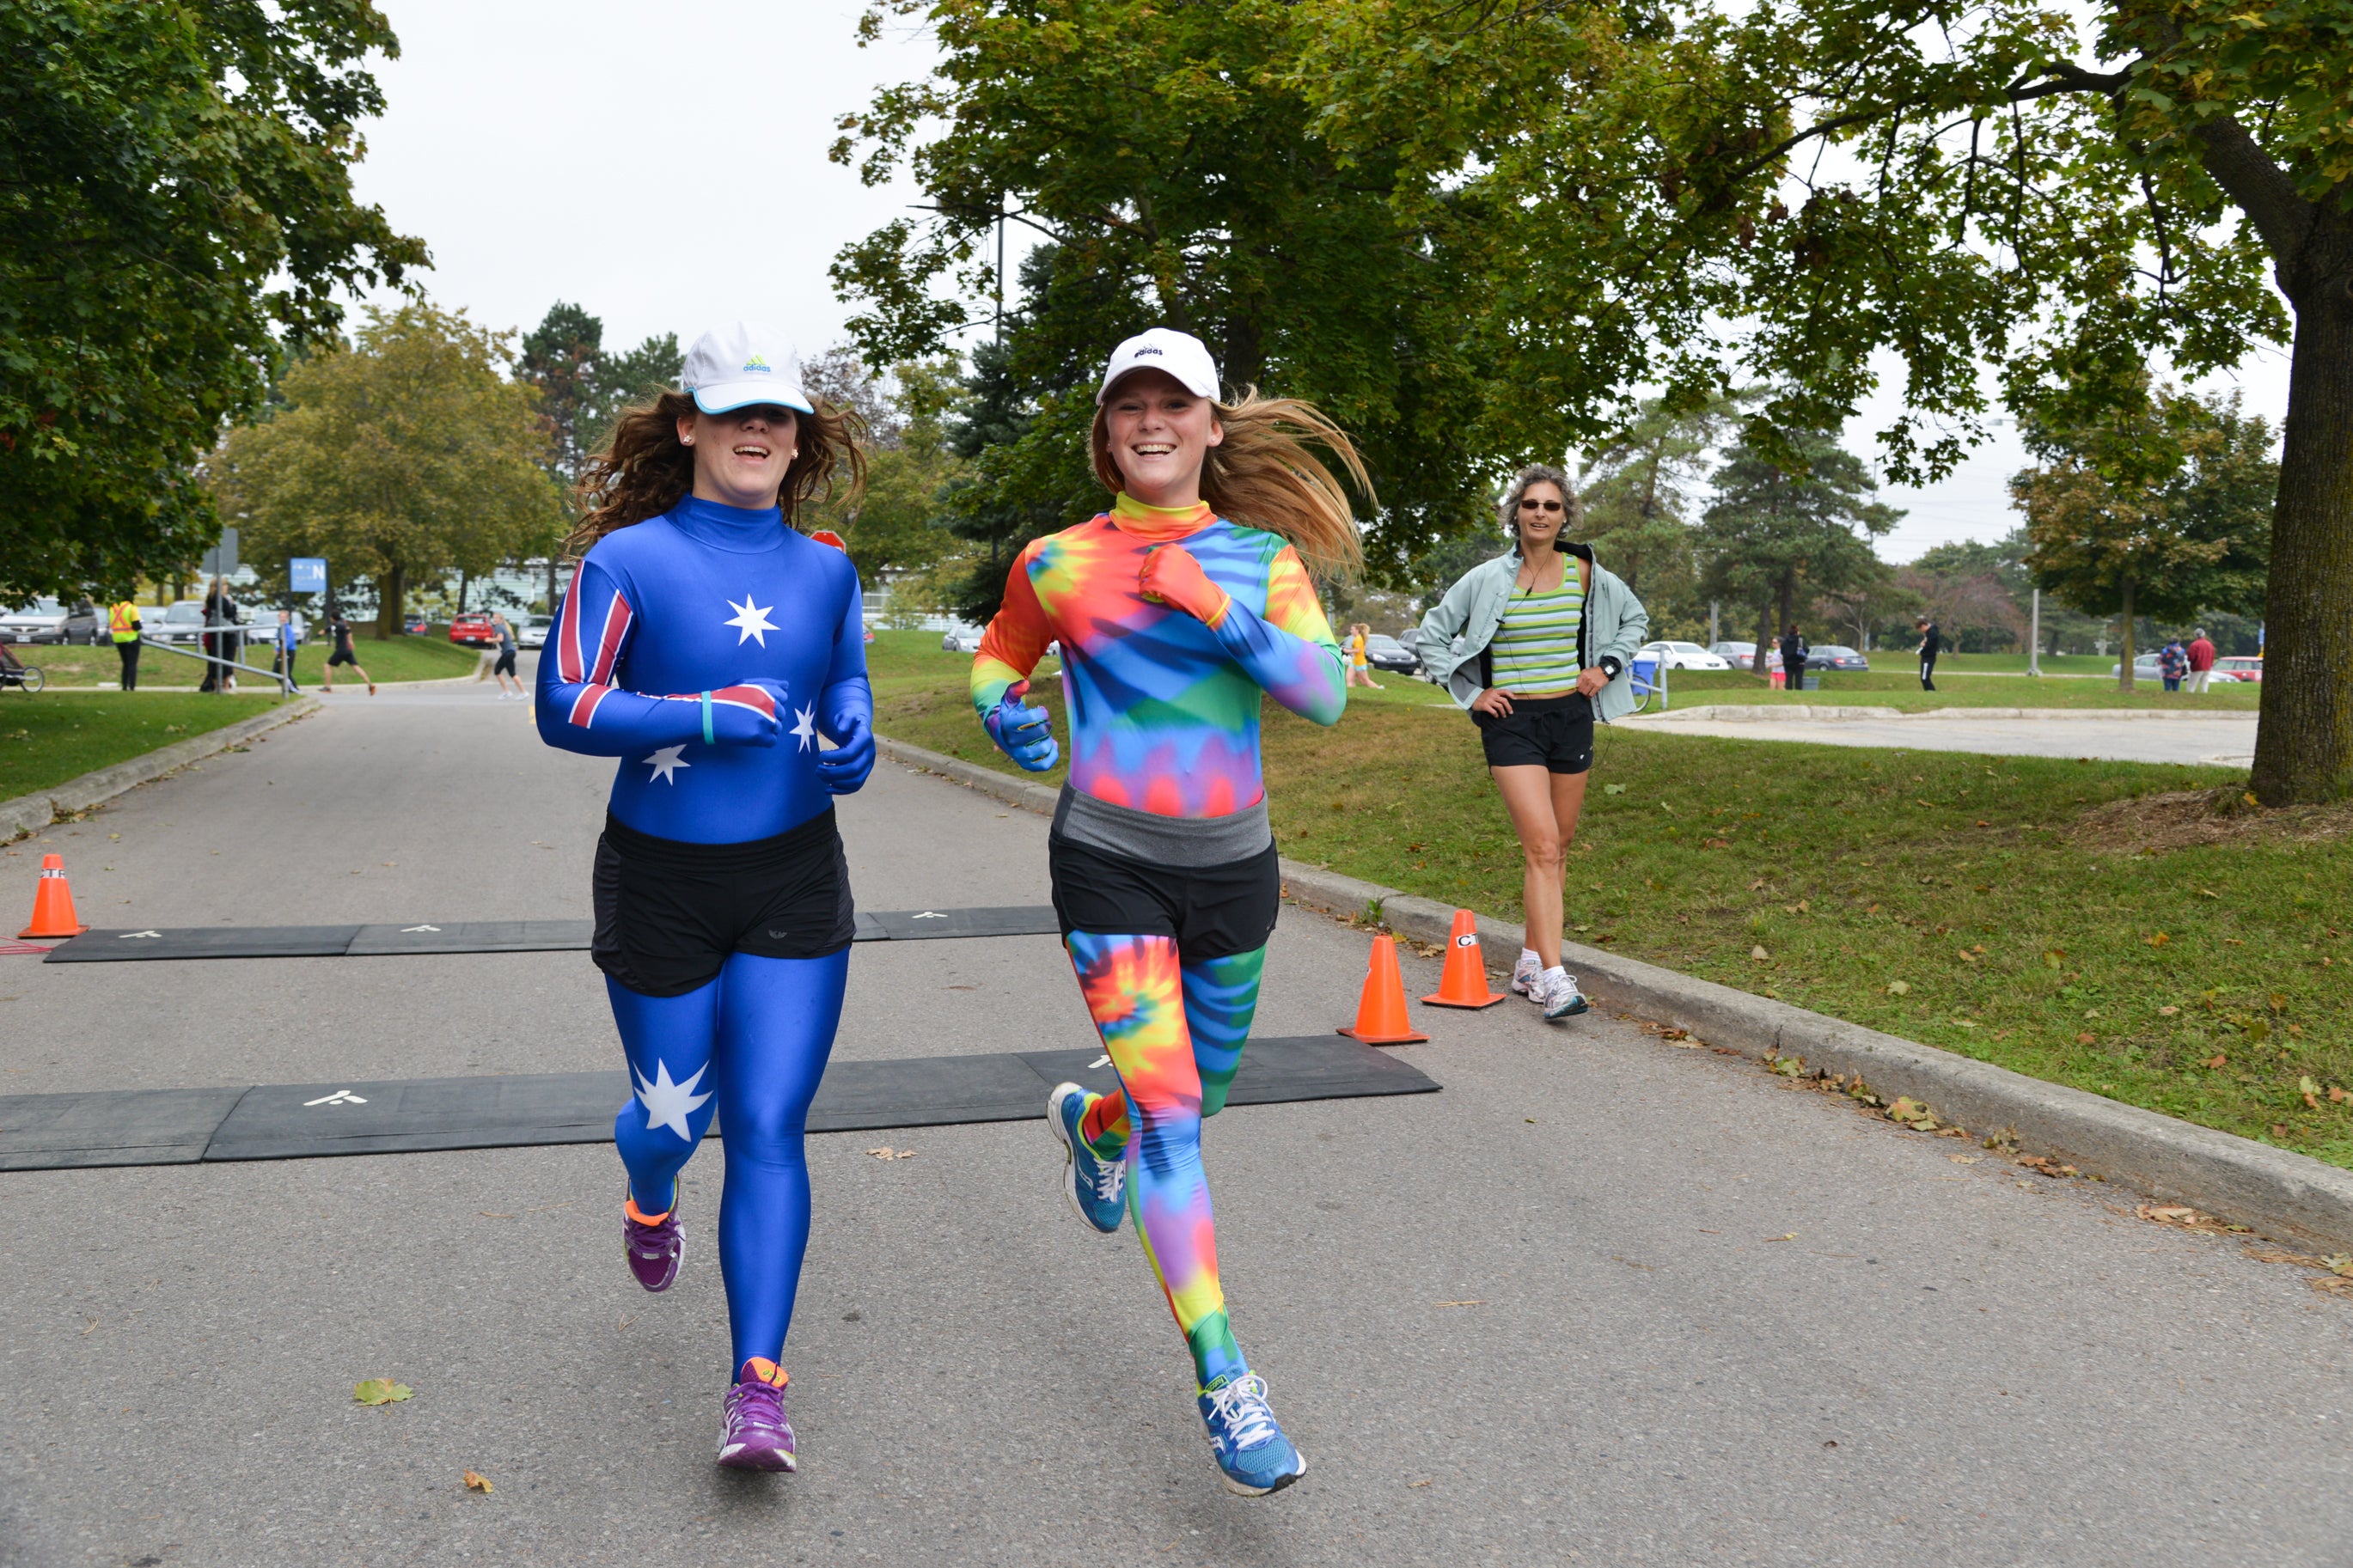 Two ladies running in full body suits.